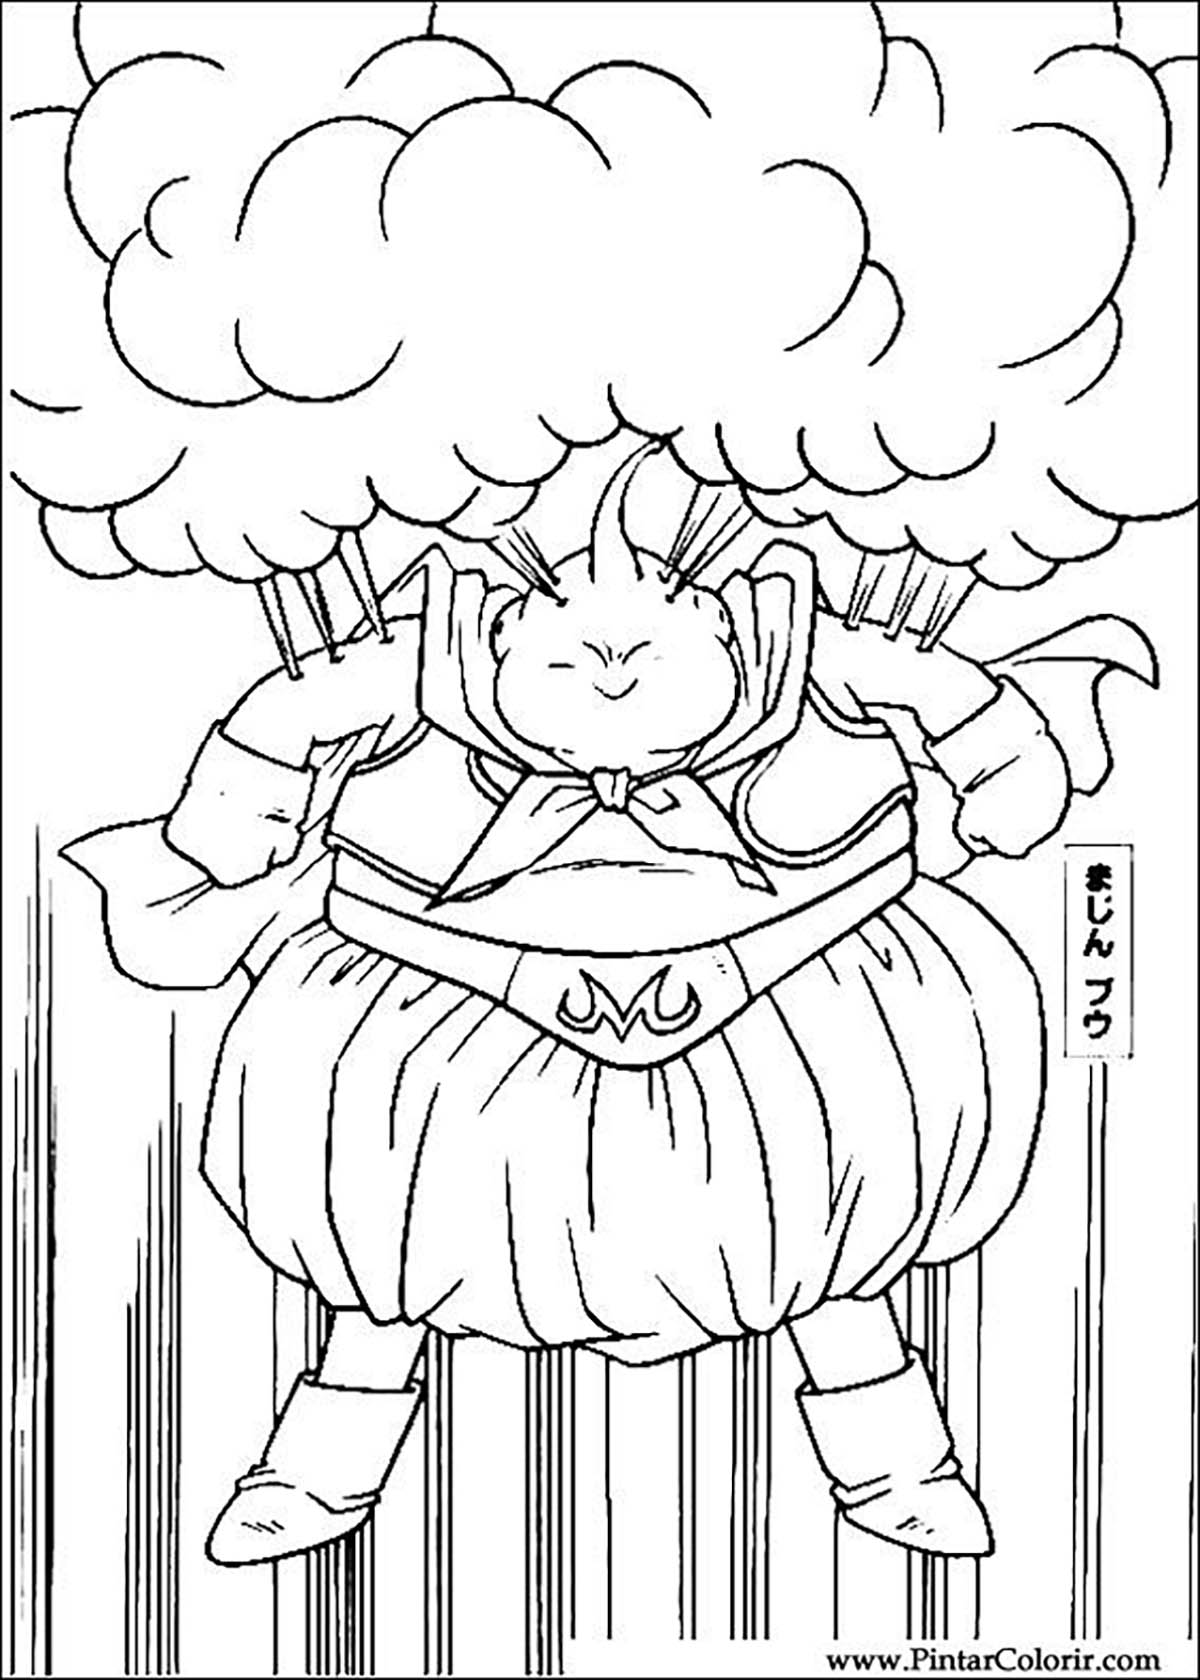 Free Dragon Ball Z coloring page to print and color : Boo